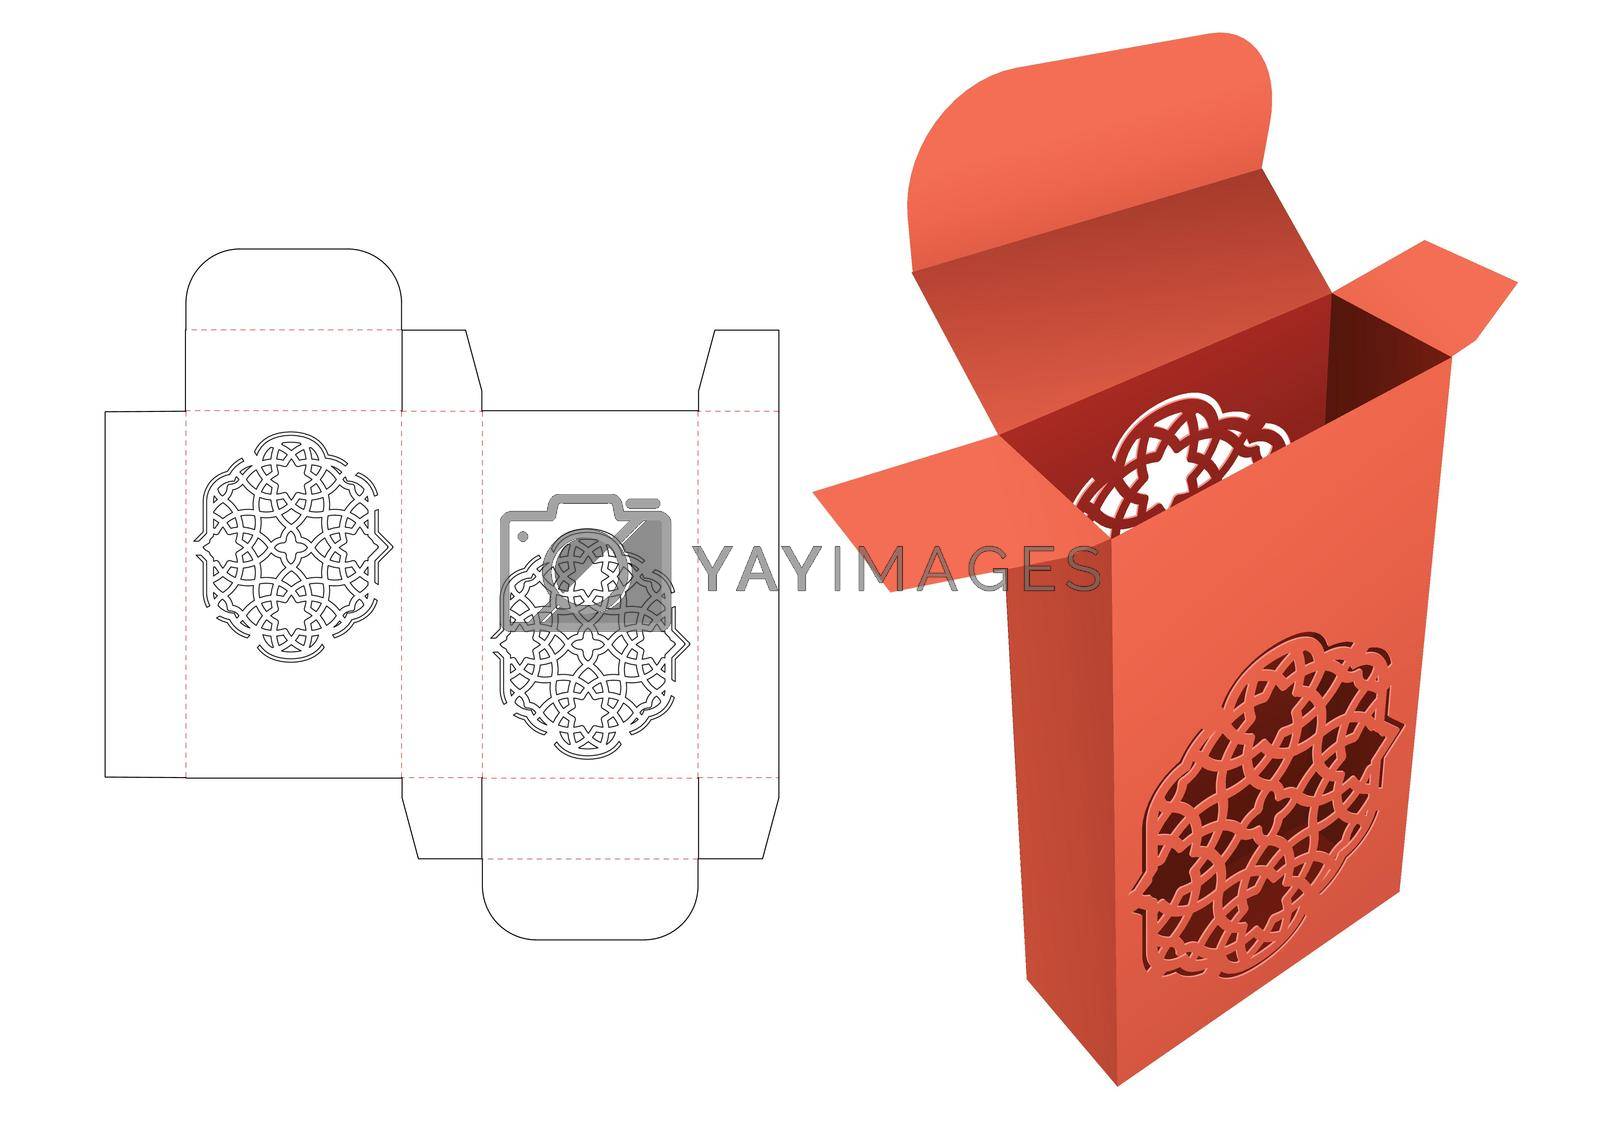 Royalty free image of Packaging box with stenciled window die cut template and 3D mockup by valueinvestor